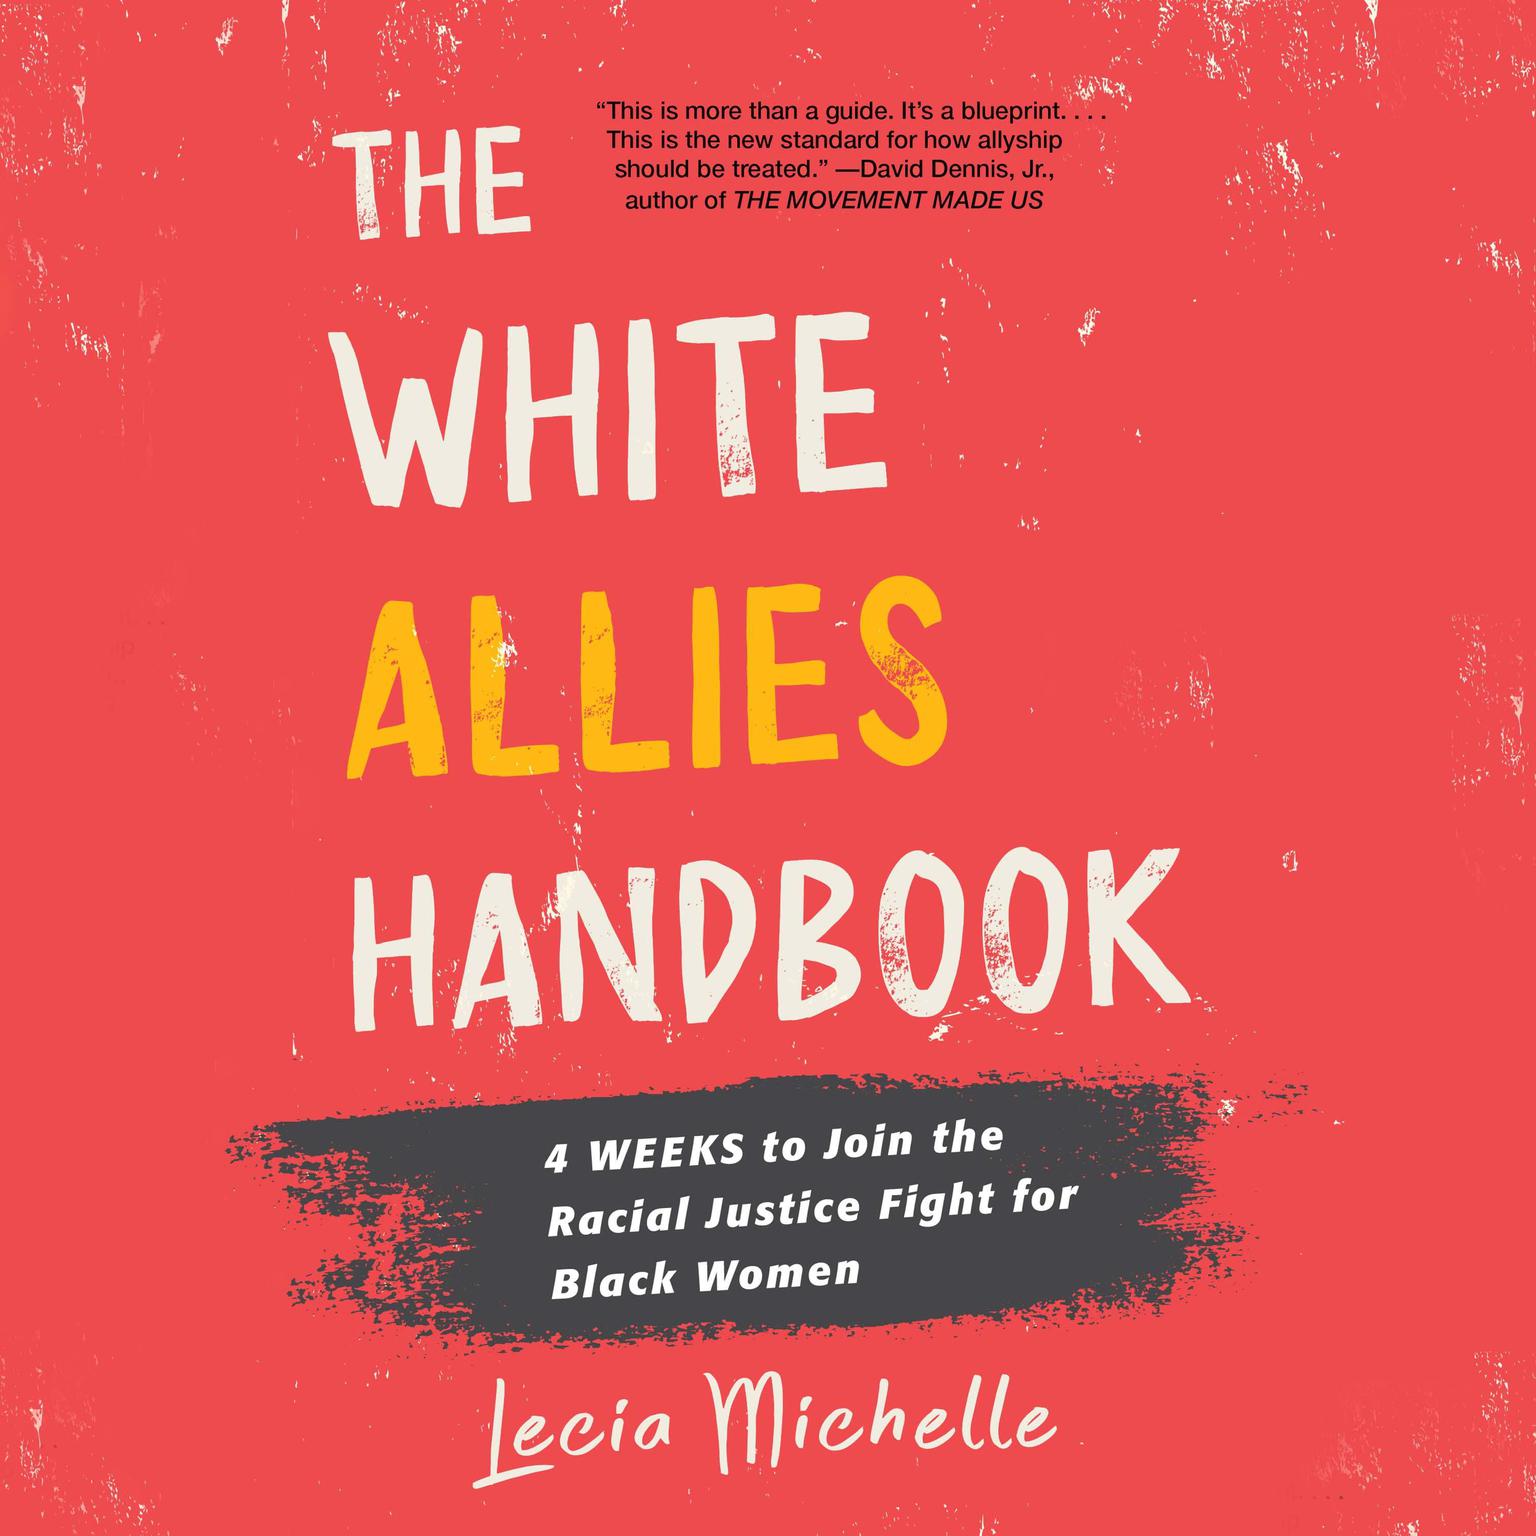 The White Allies Handbook: 4 Weeks to Join the Racial Justice Fight for Black Women Audiobook, by Lecia Michelle